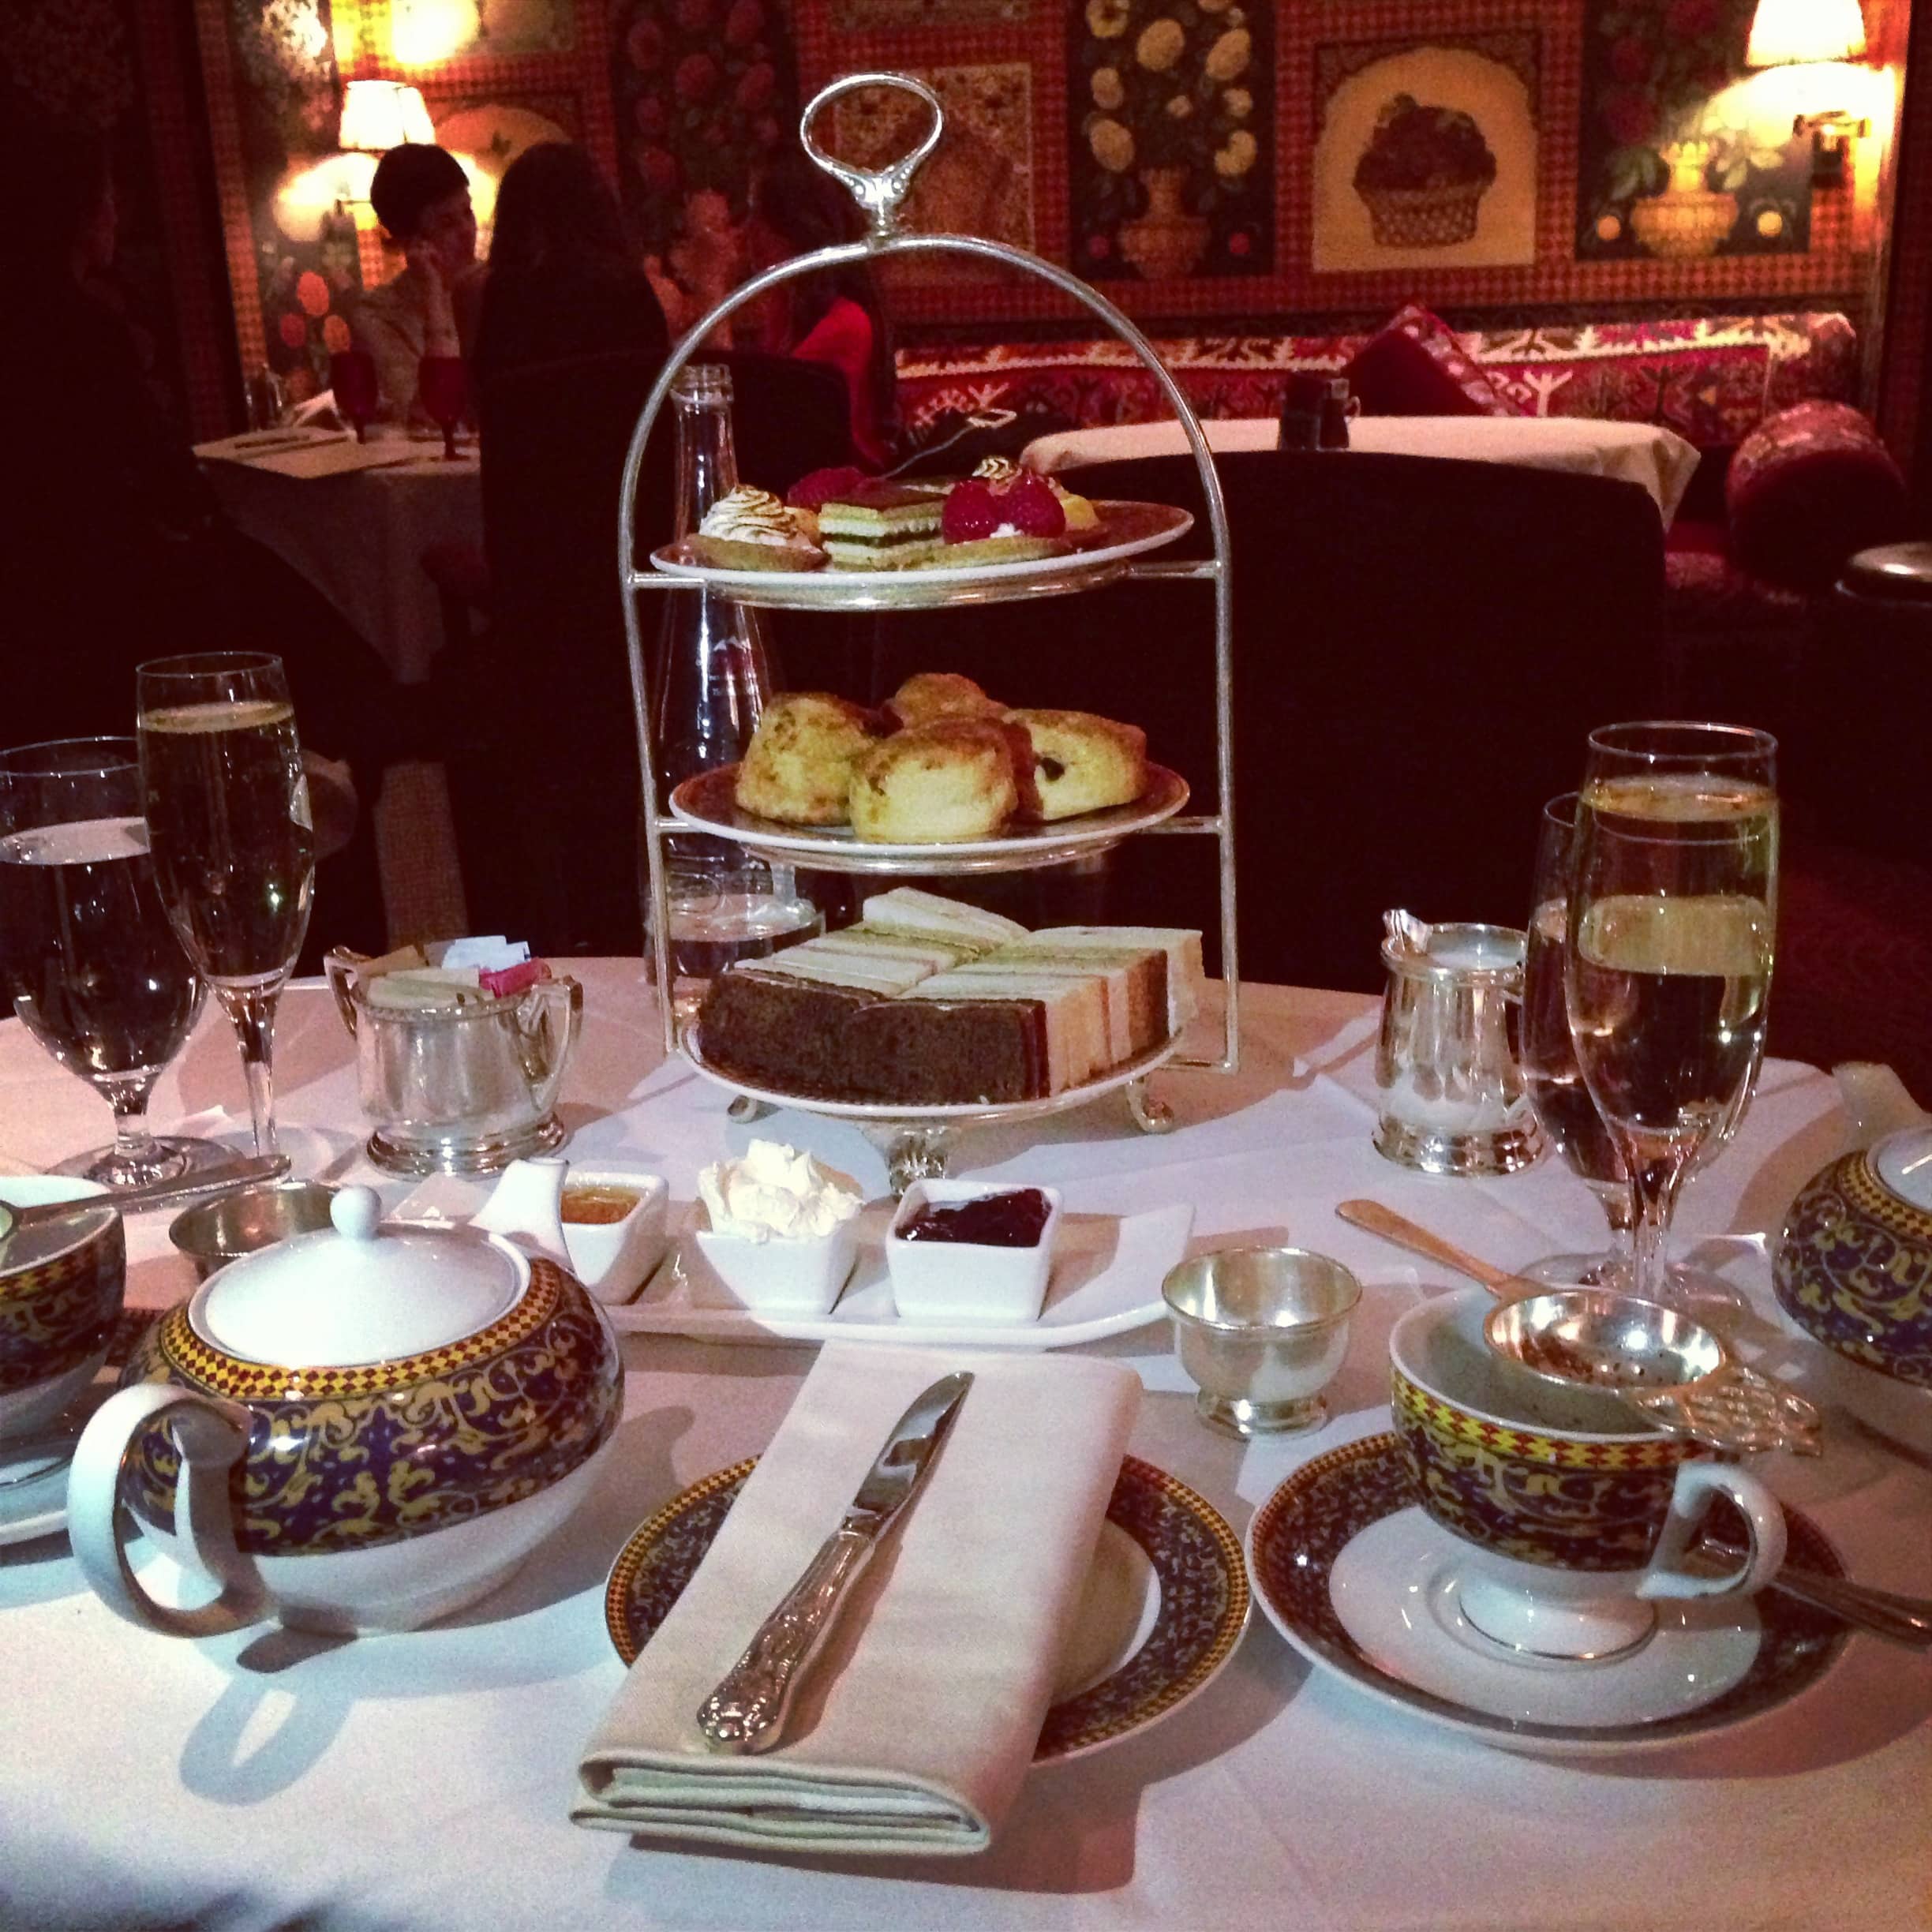 Afternoon Tea at The Carlyle, New York